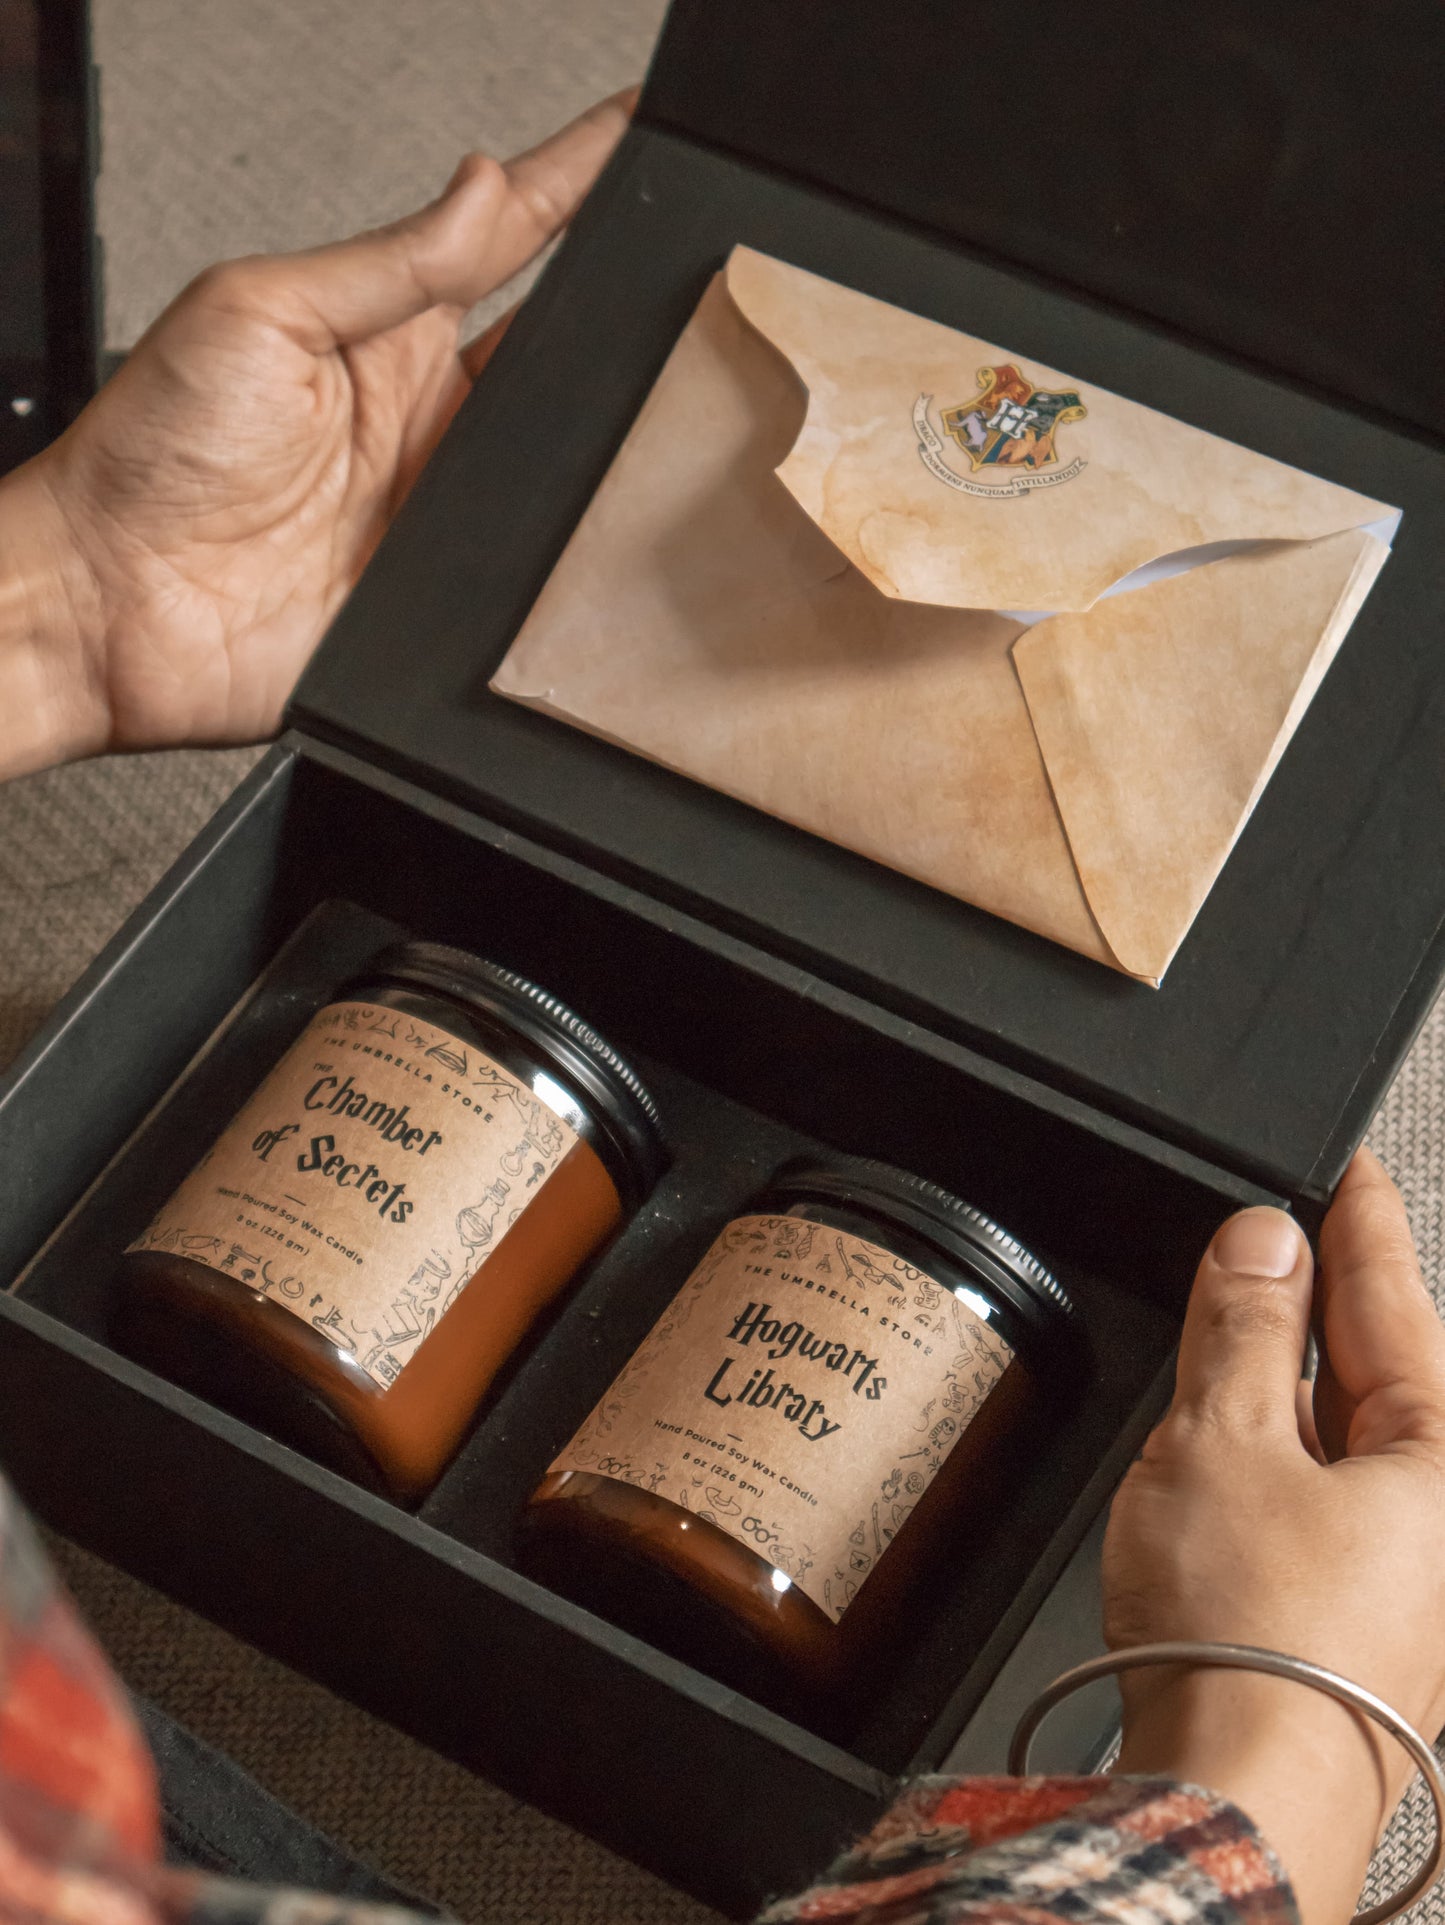 Chamber of secrets and hogwarts library scented candle